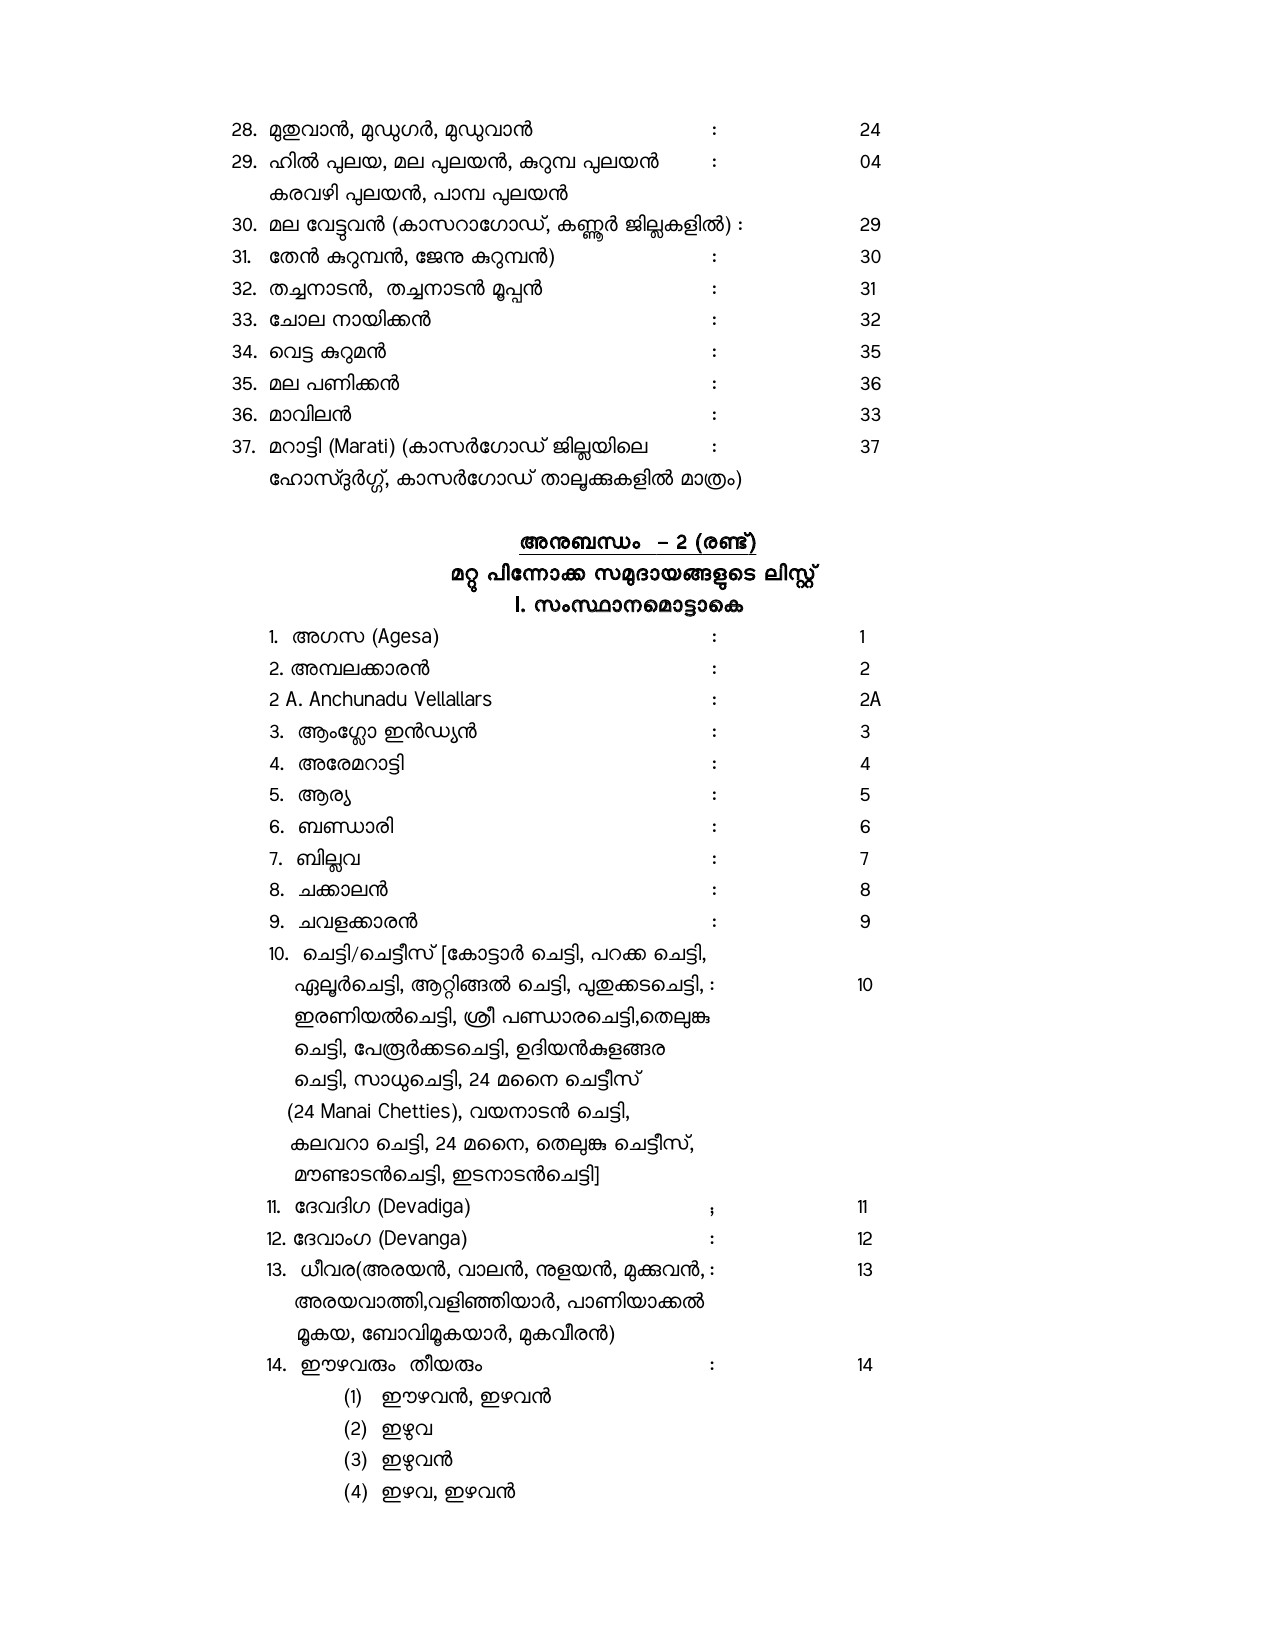 General Conditions and Certificate Formats in Malayalam - Notification Image 30